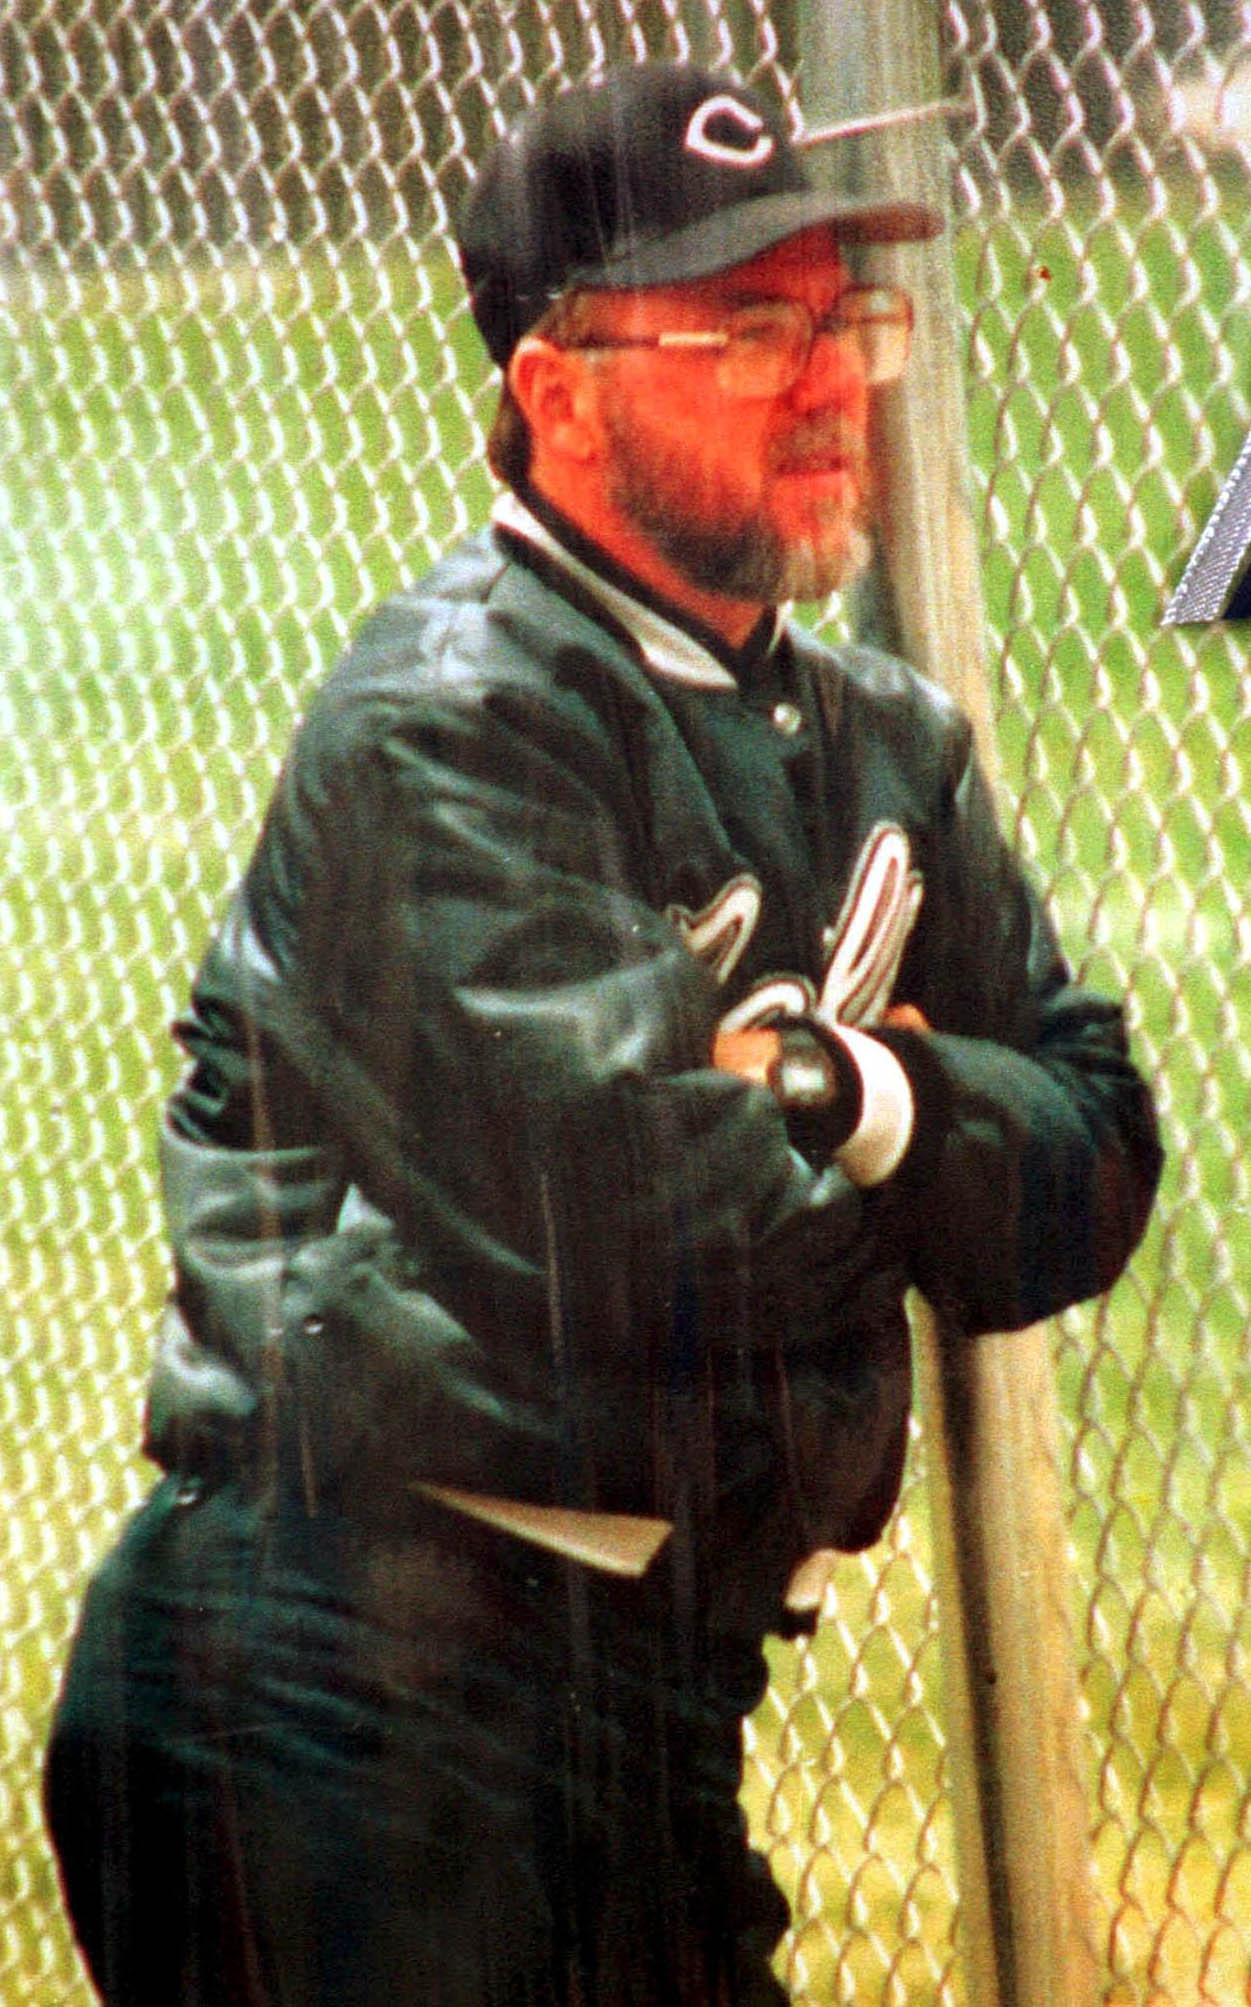 Dave Sanders was the teacher killed at Columbine High School on April 20, 1999.